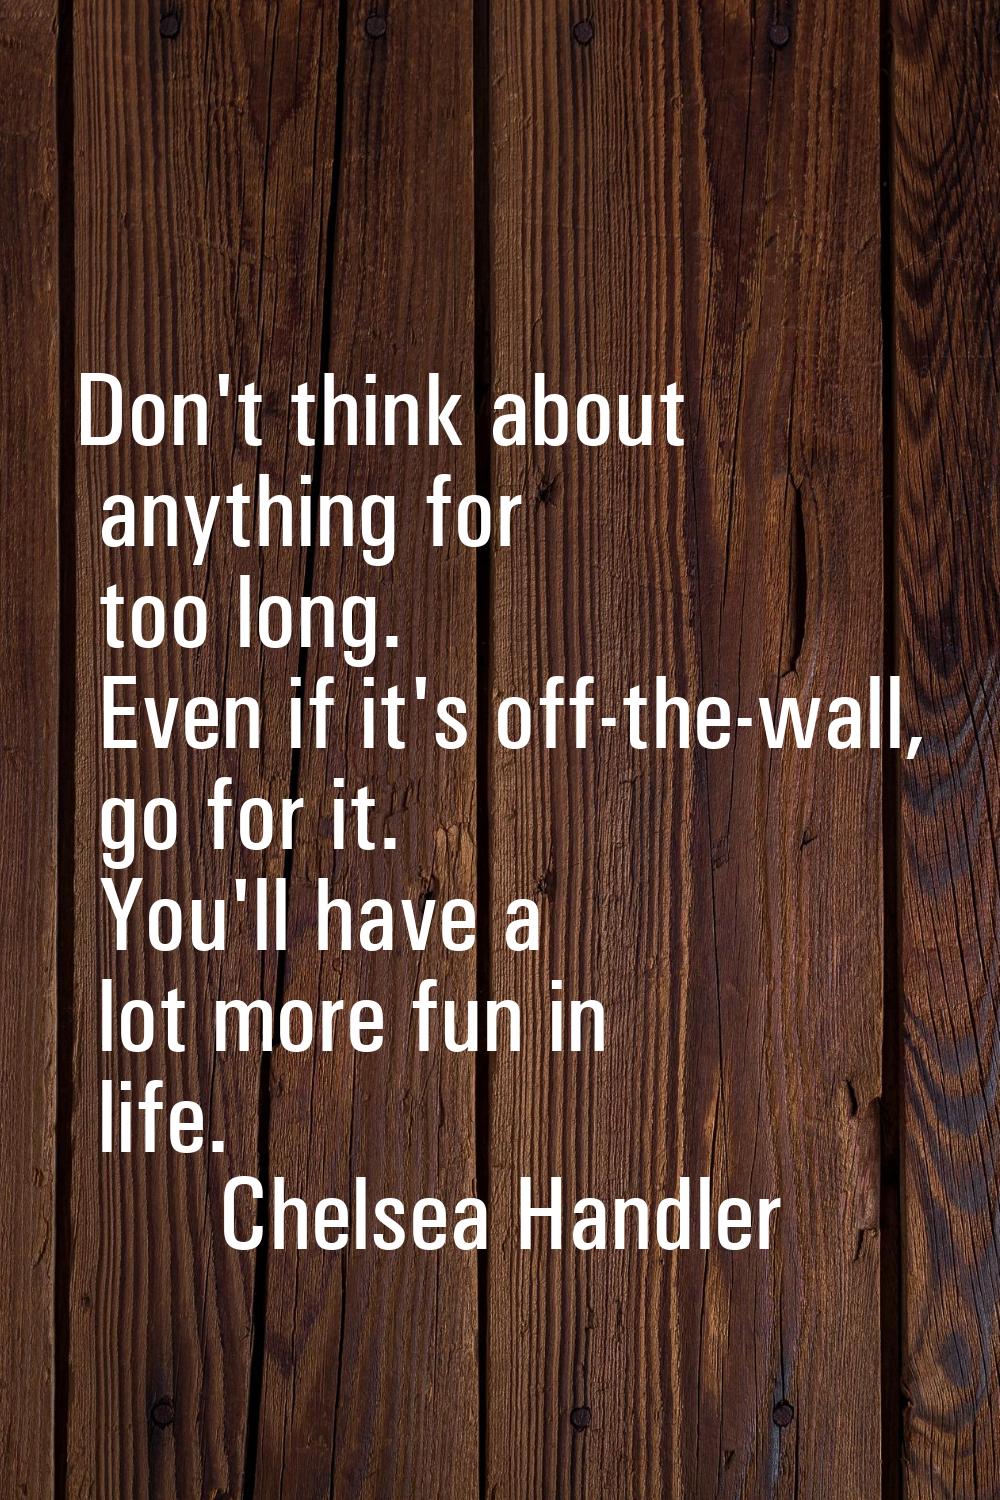 Don't think about anything for too long. Even if it's off-the-wall, go for it. You'll have a lot mo